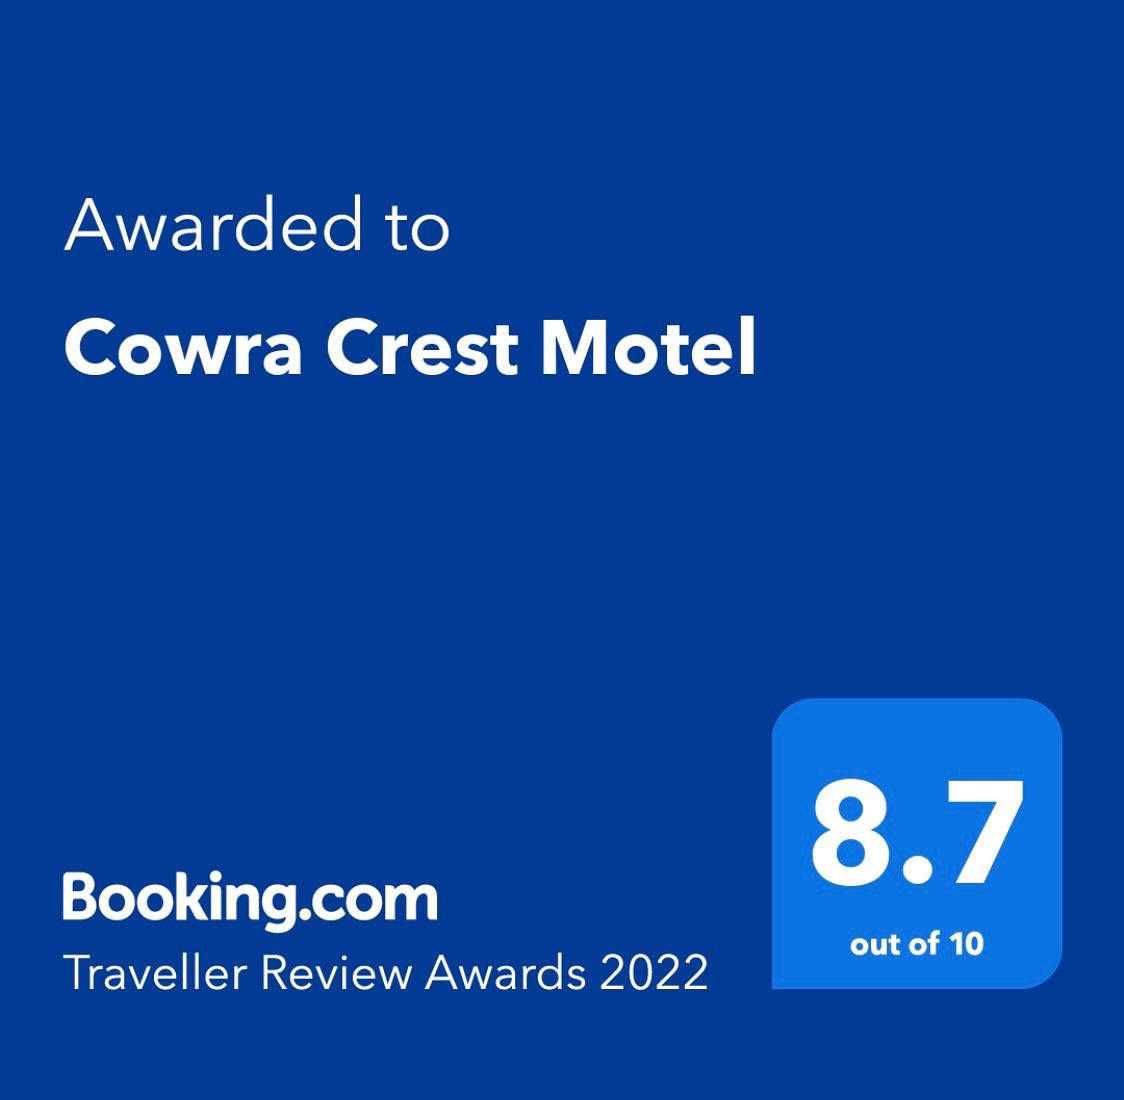 Rated 8.7 in Booking.com Traveller Review Awards 2022